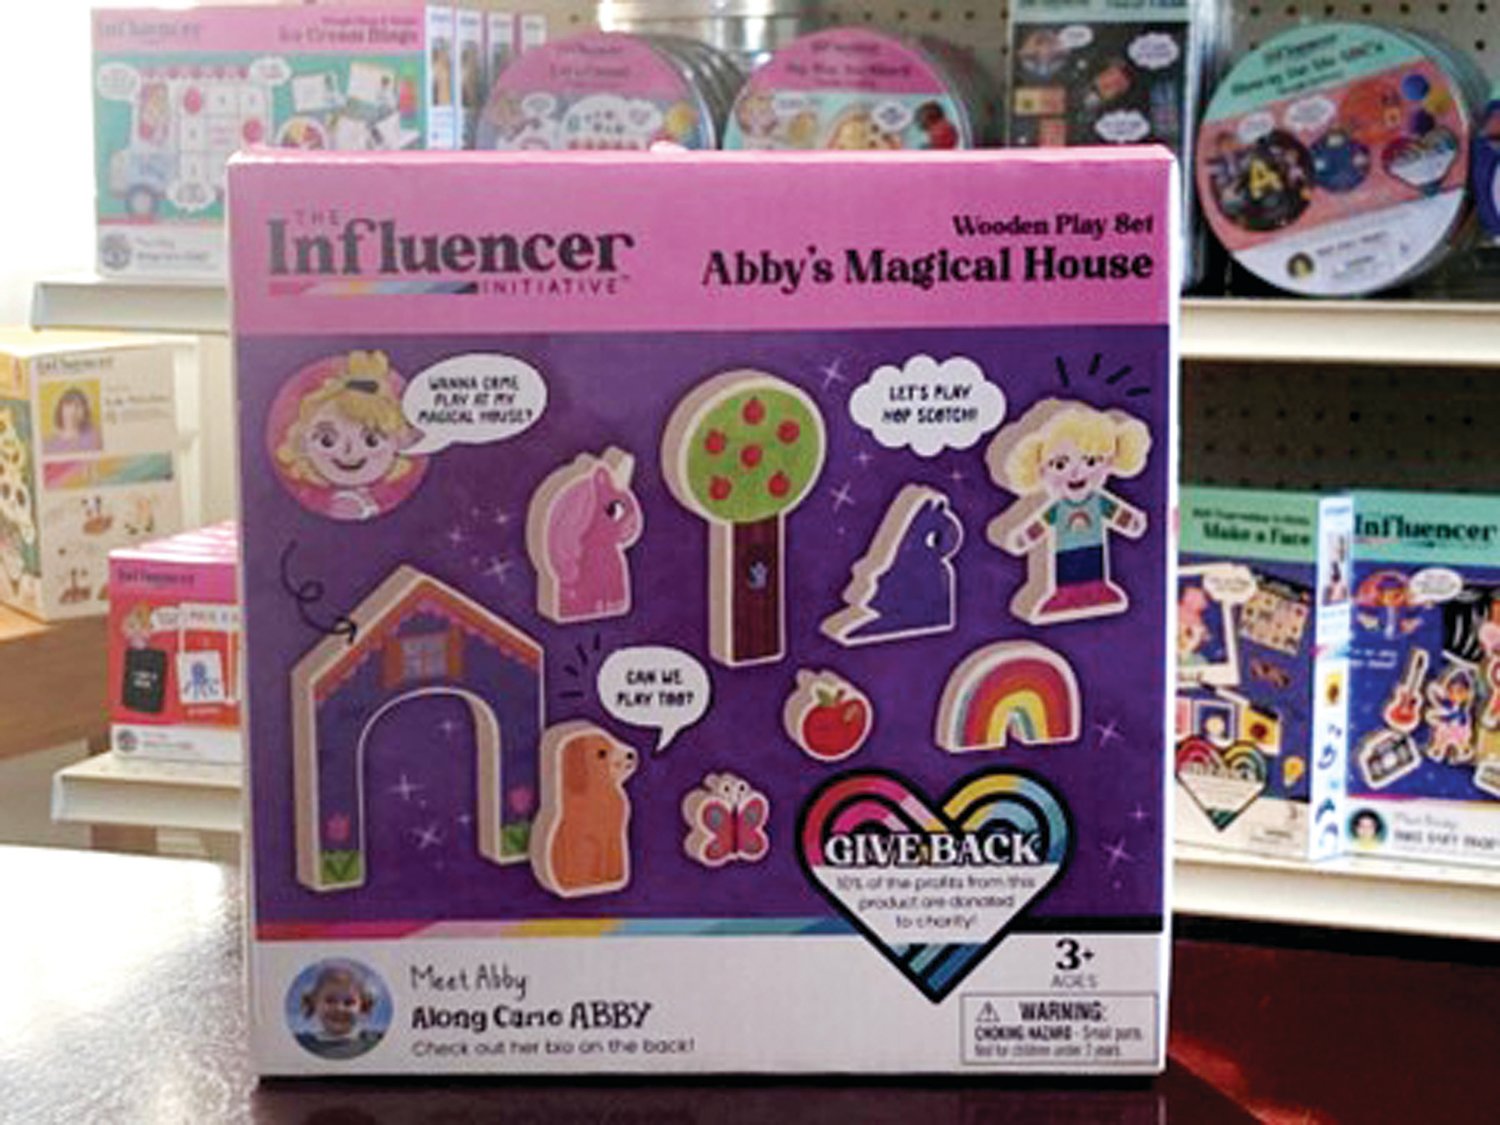 One of the toys offered under Morrisville Borough-based WeVeel’s new The Influencer Initiative.